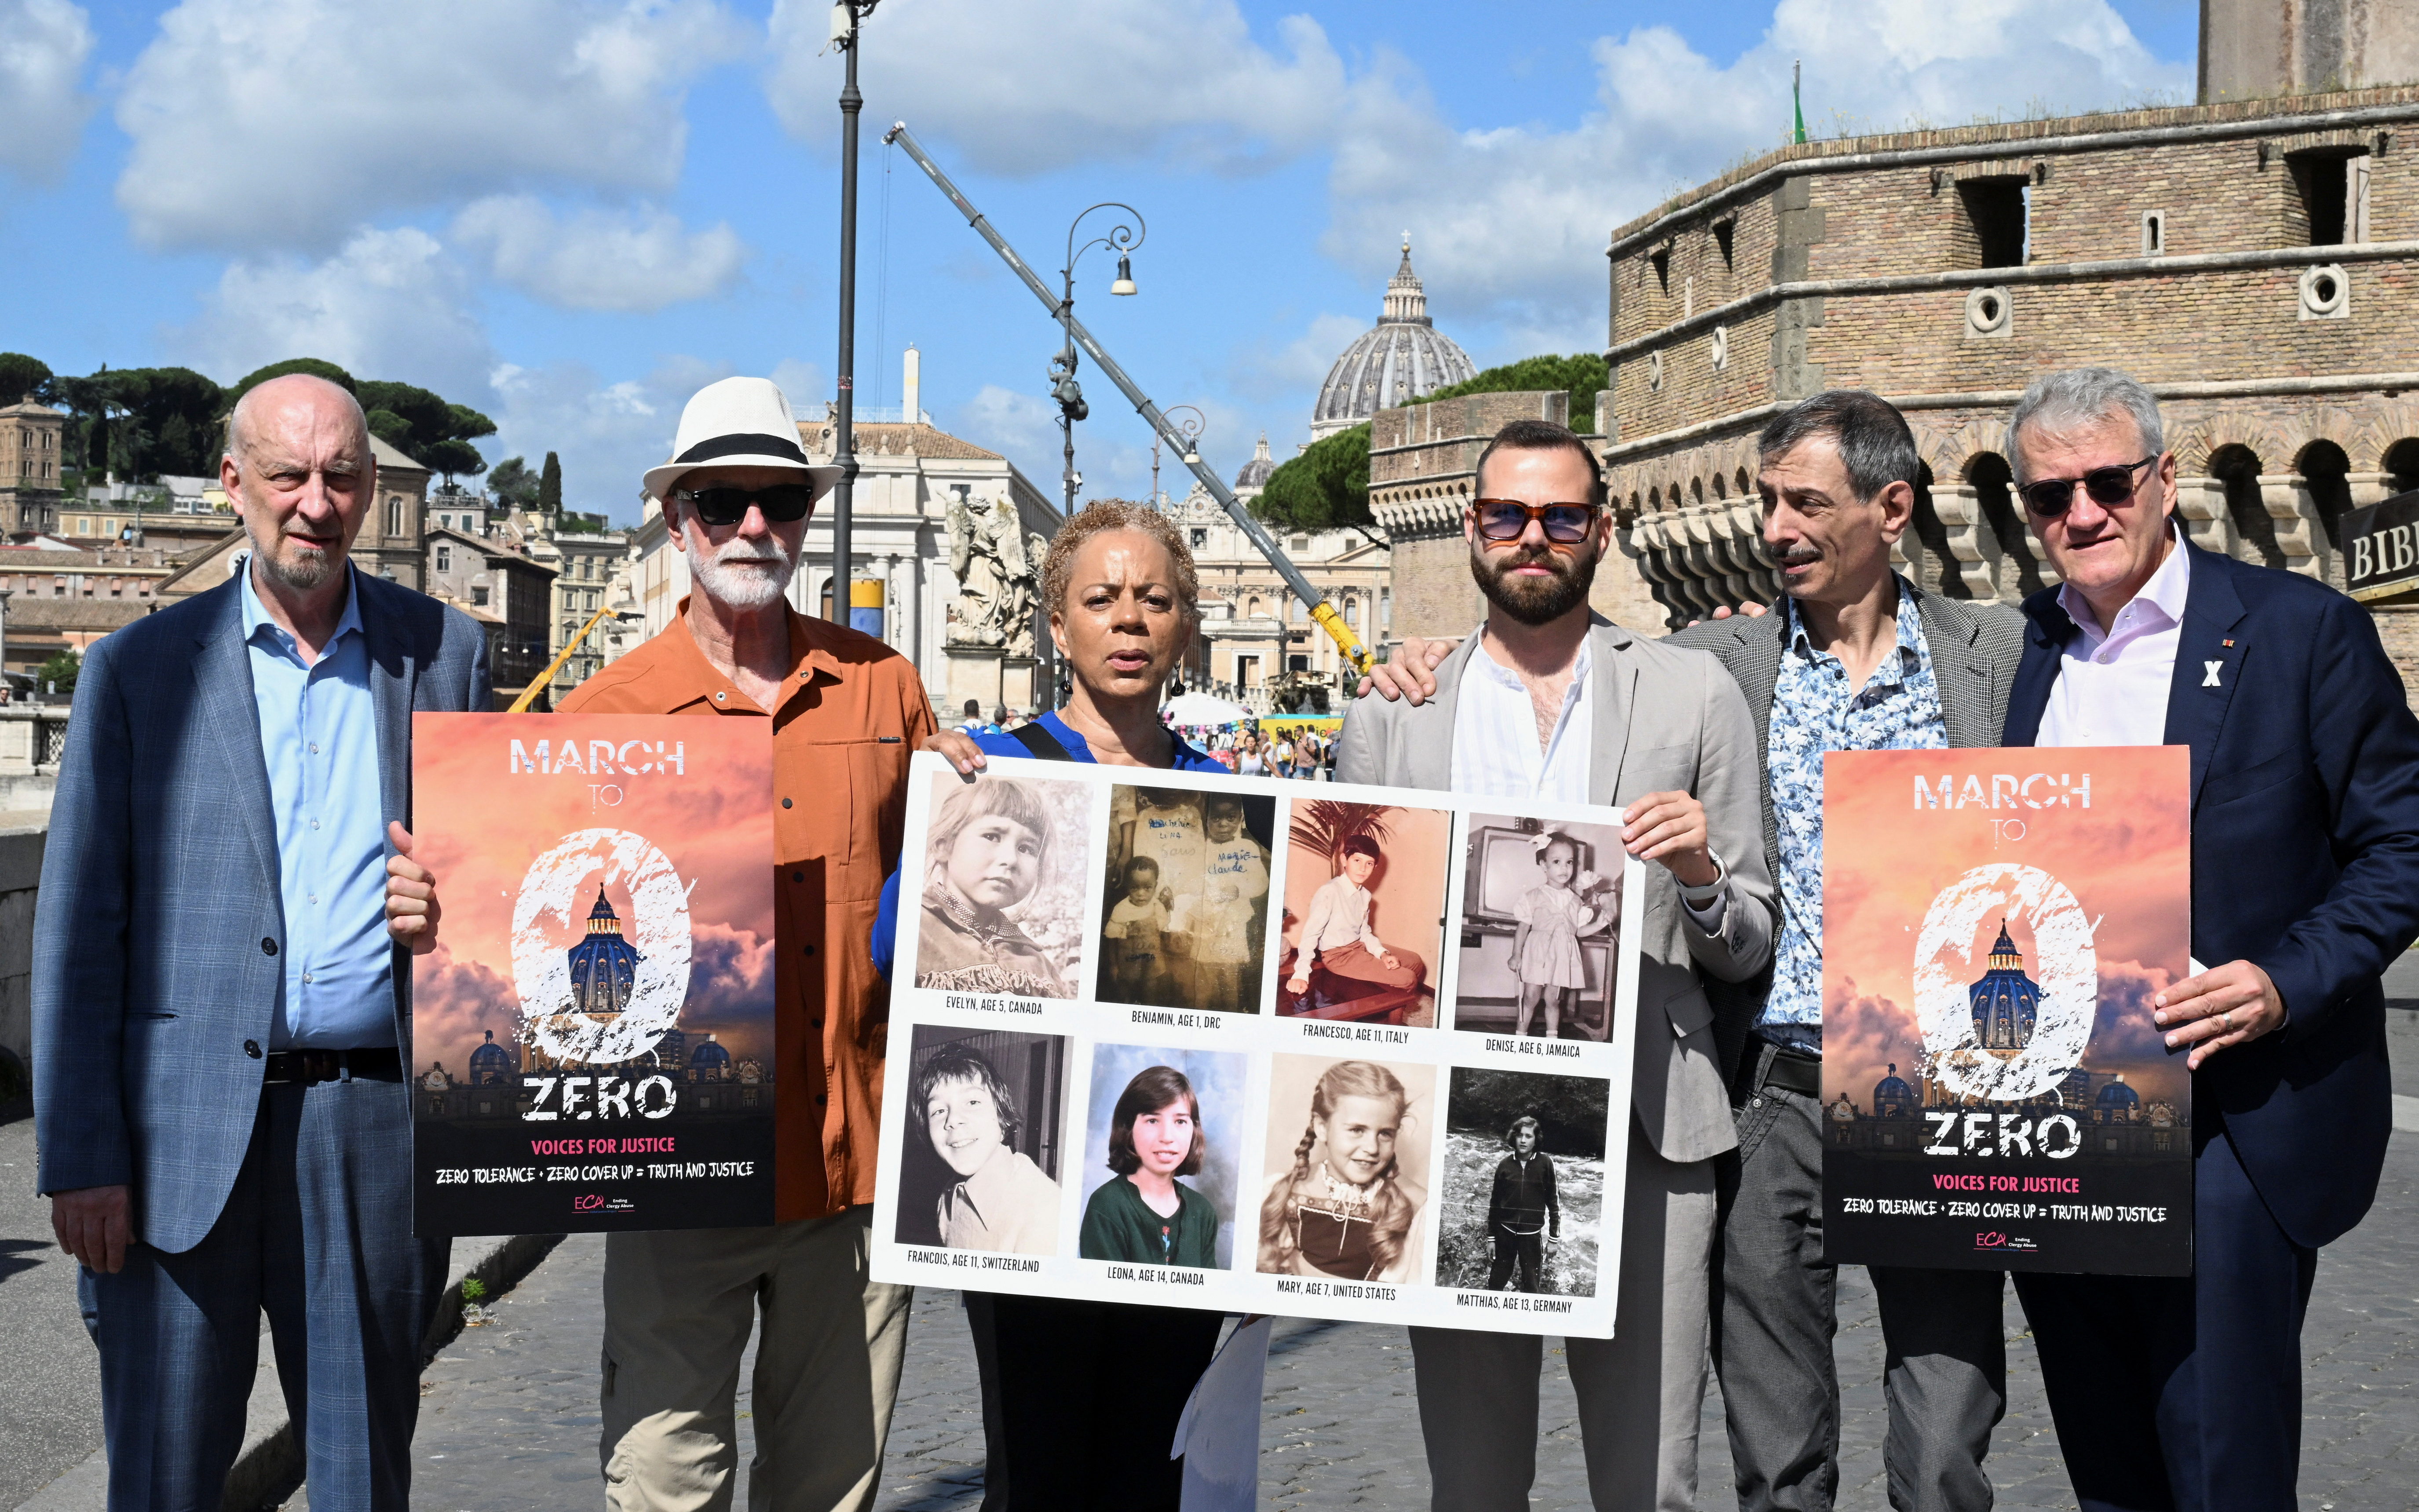 Clergy abuse survivors demonstrate near Vatican